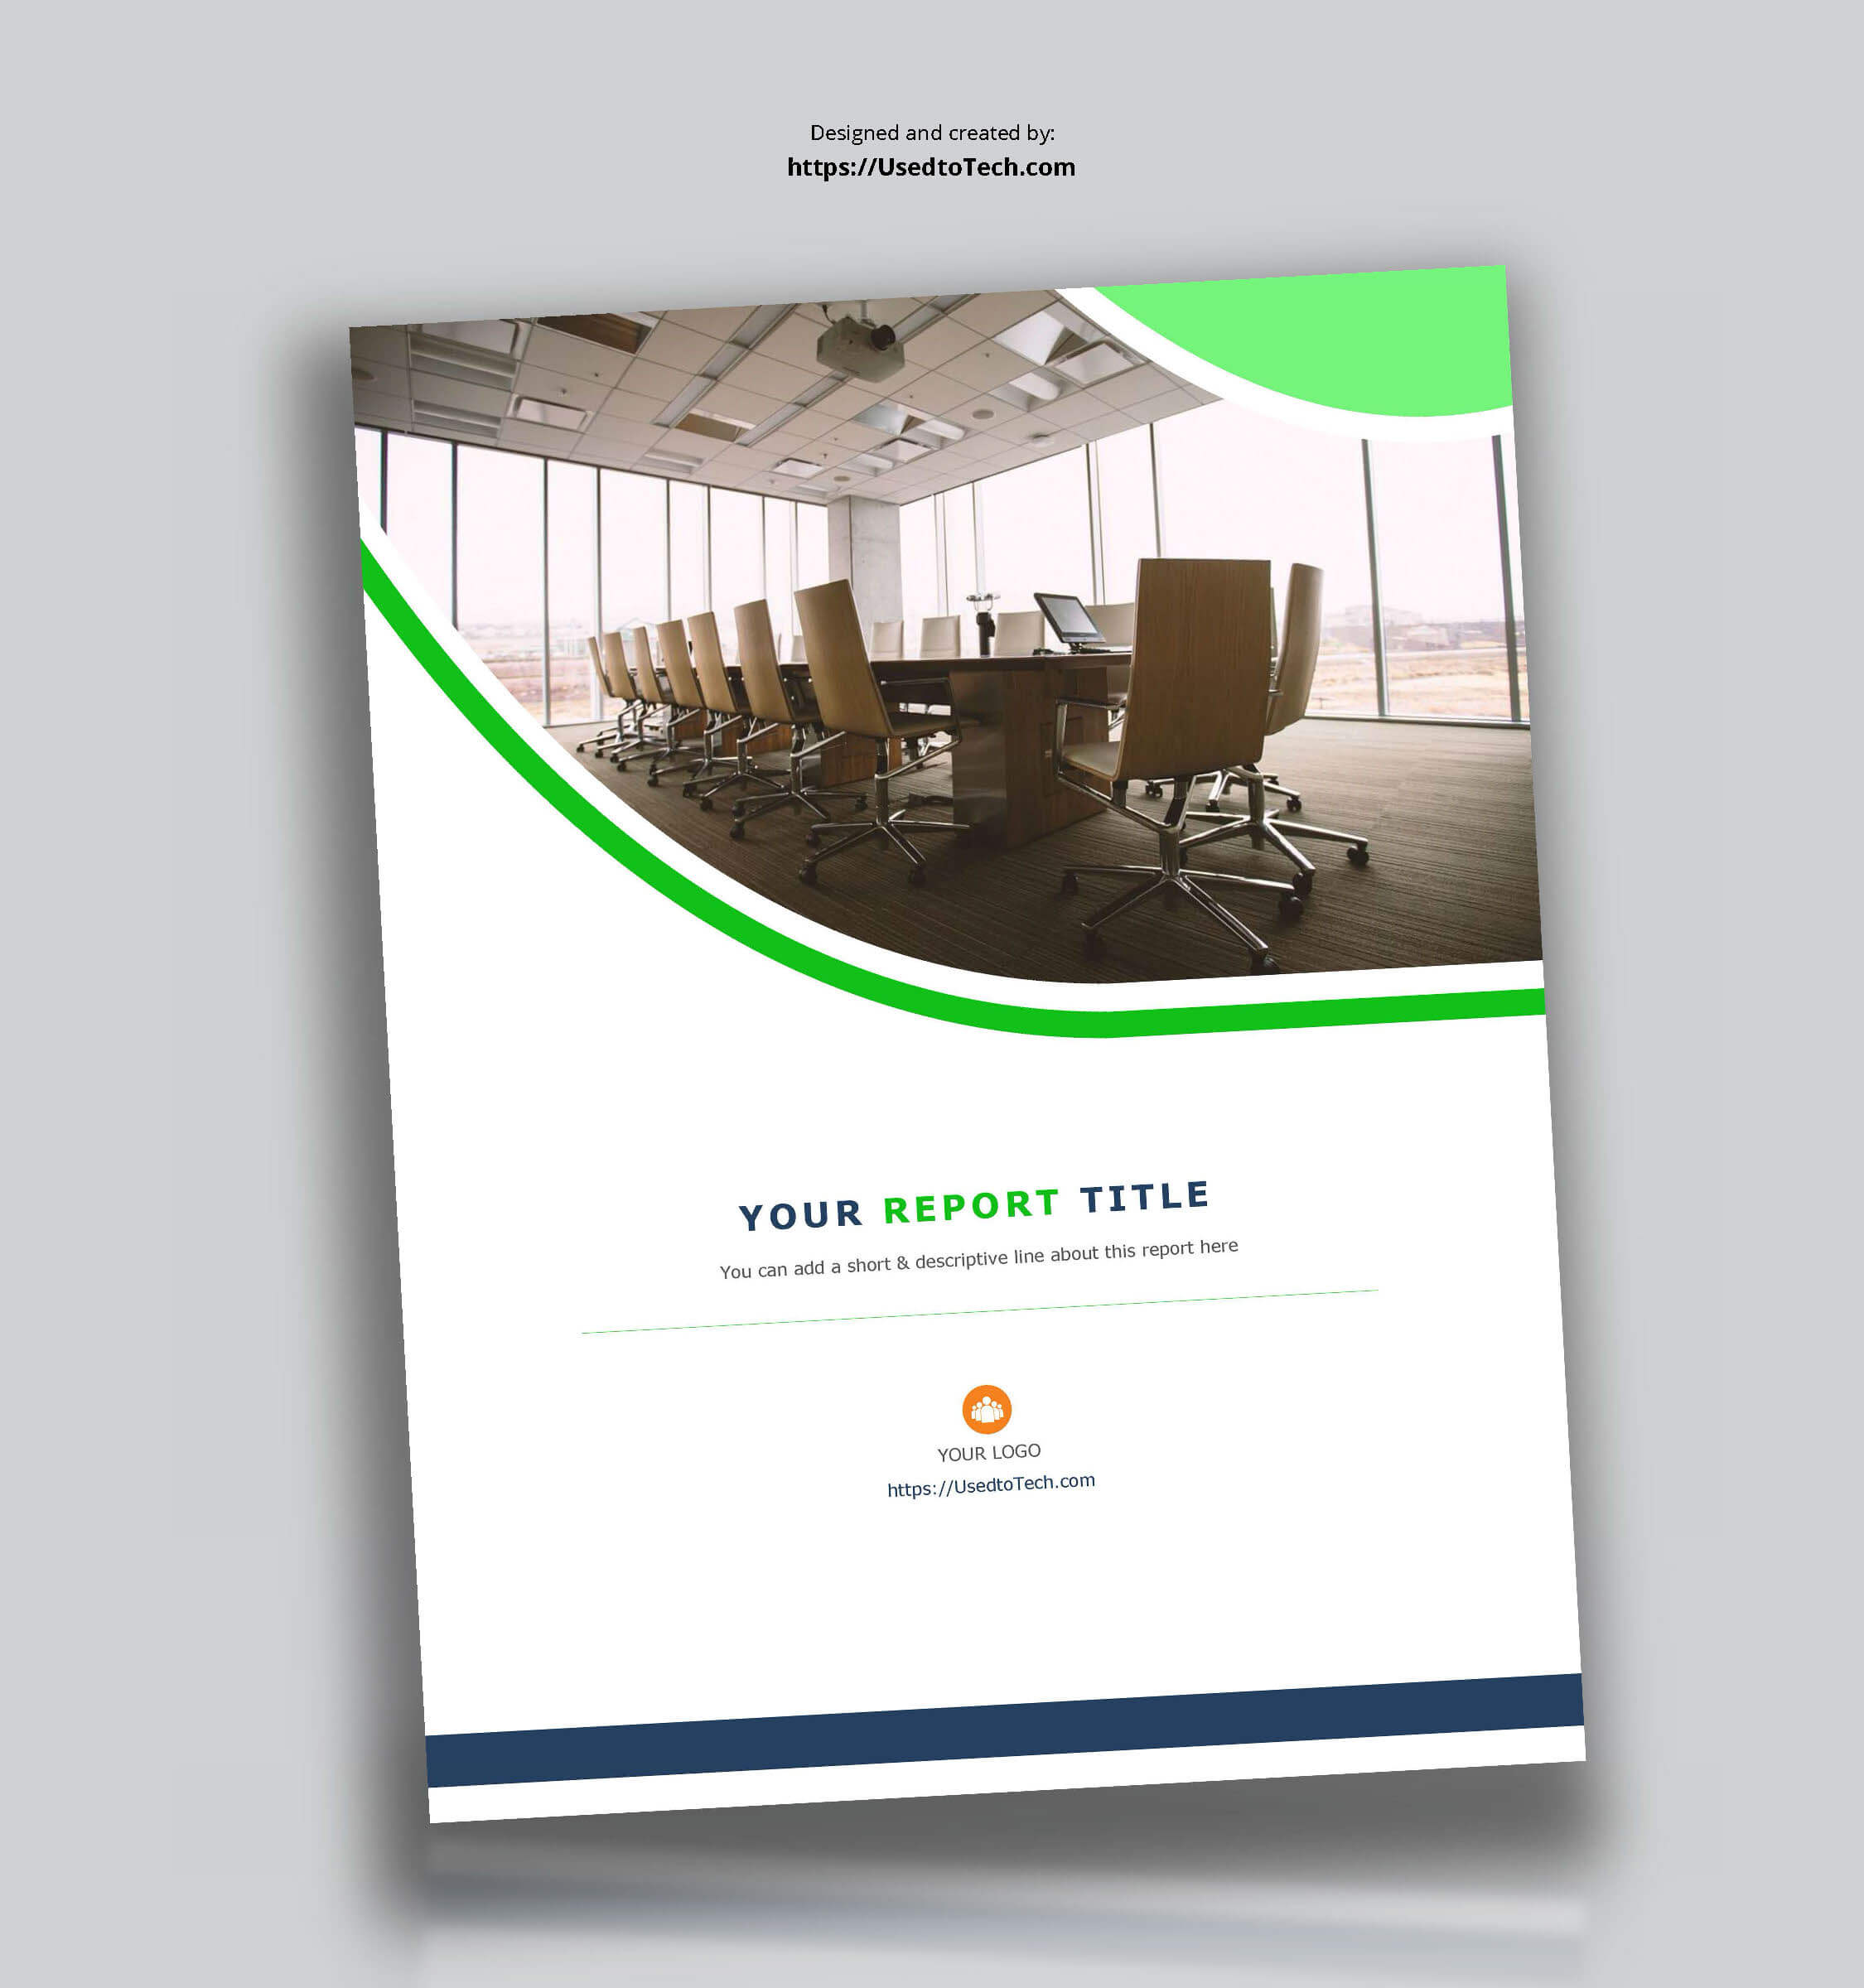 Corporate Report Design Template In Microsoft Word – Used To Inside It Report Template For Word